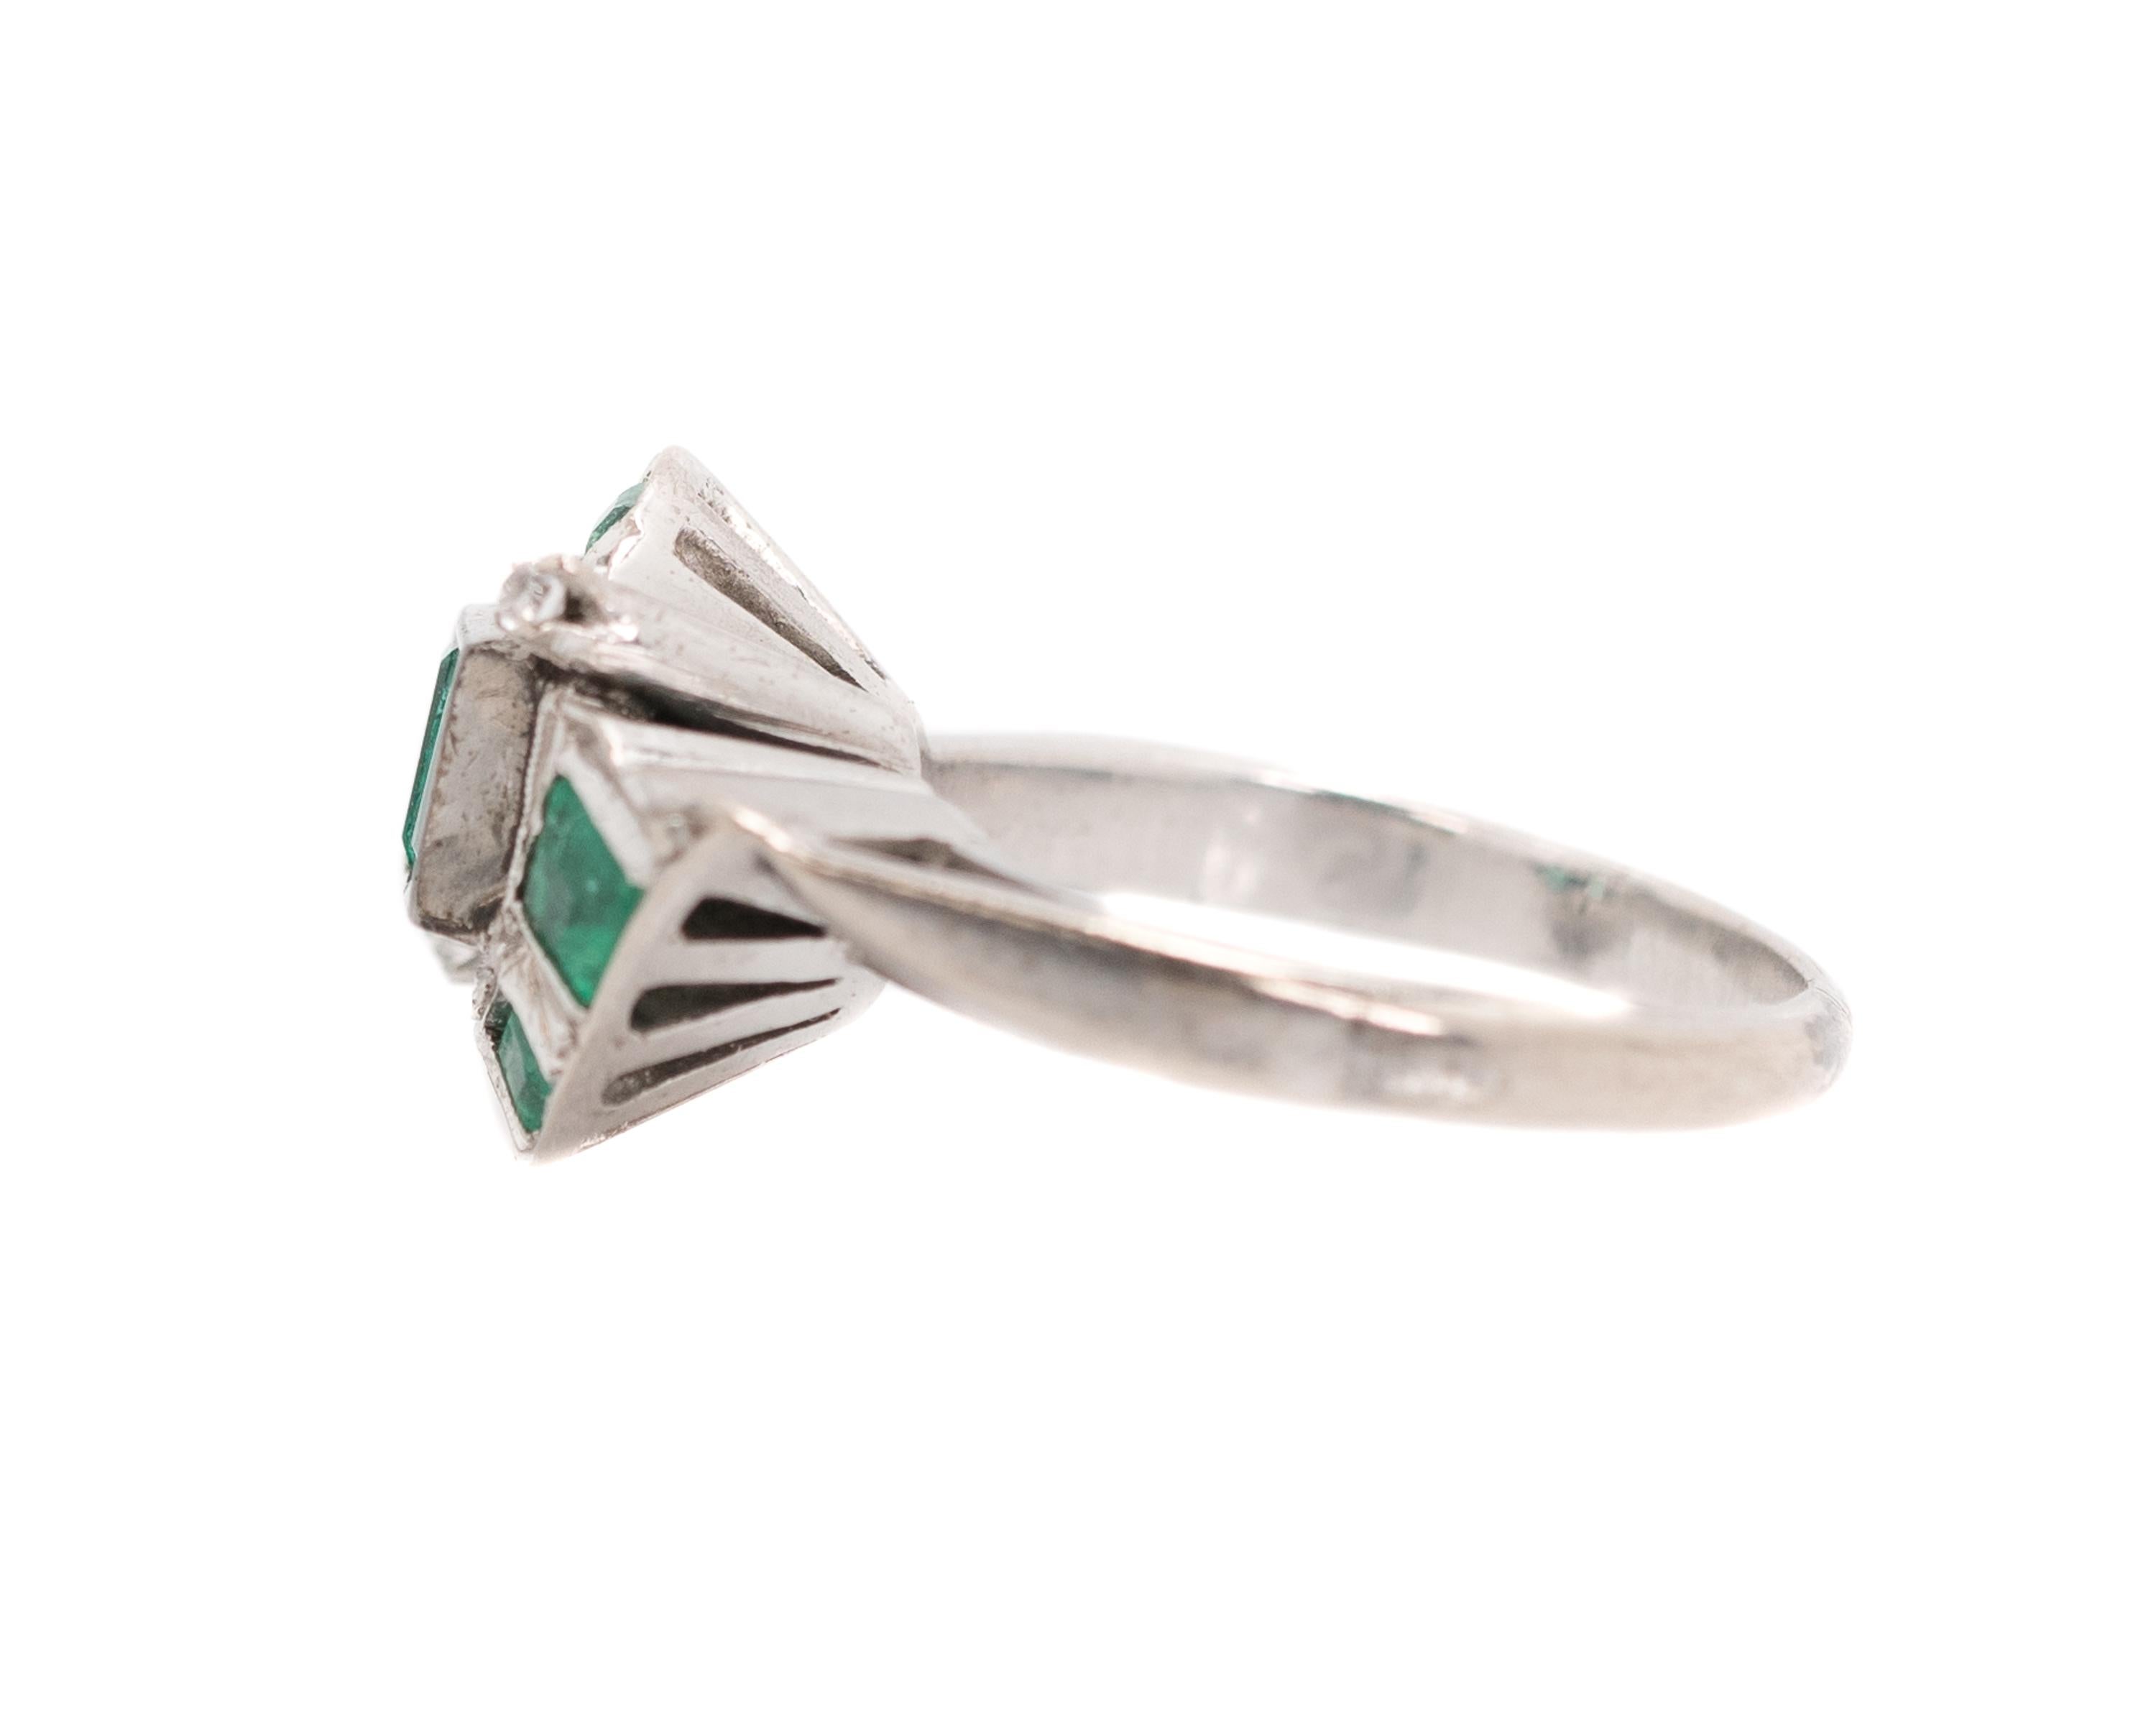 Women's 1920s 0.75 Carat Colombian Emerald and 18 Karat White Gold Bypass Ring